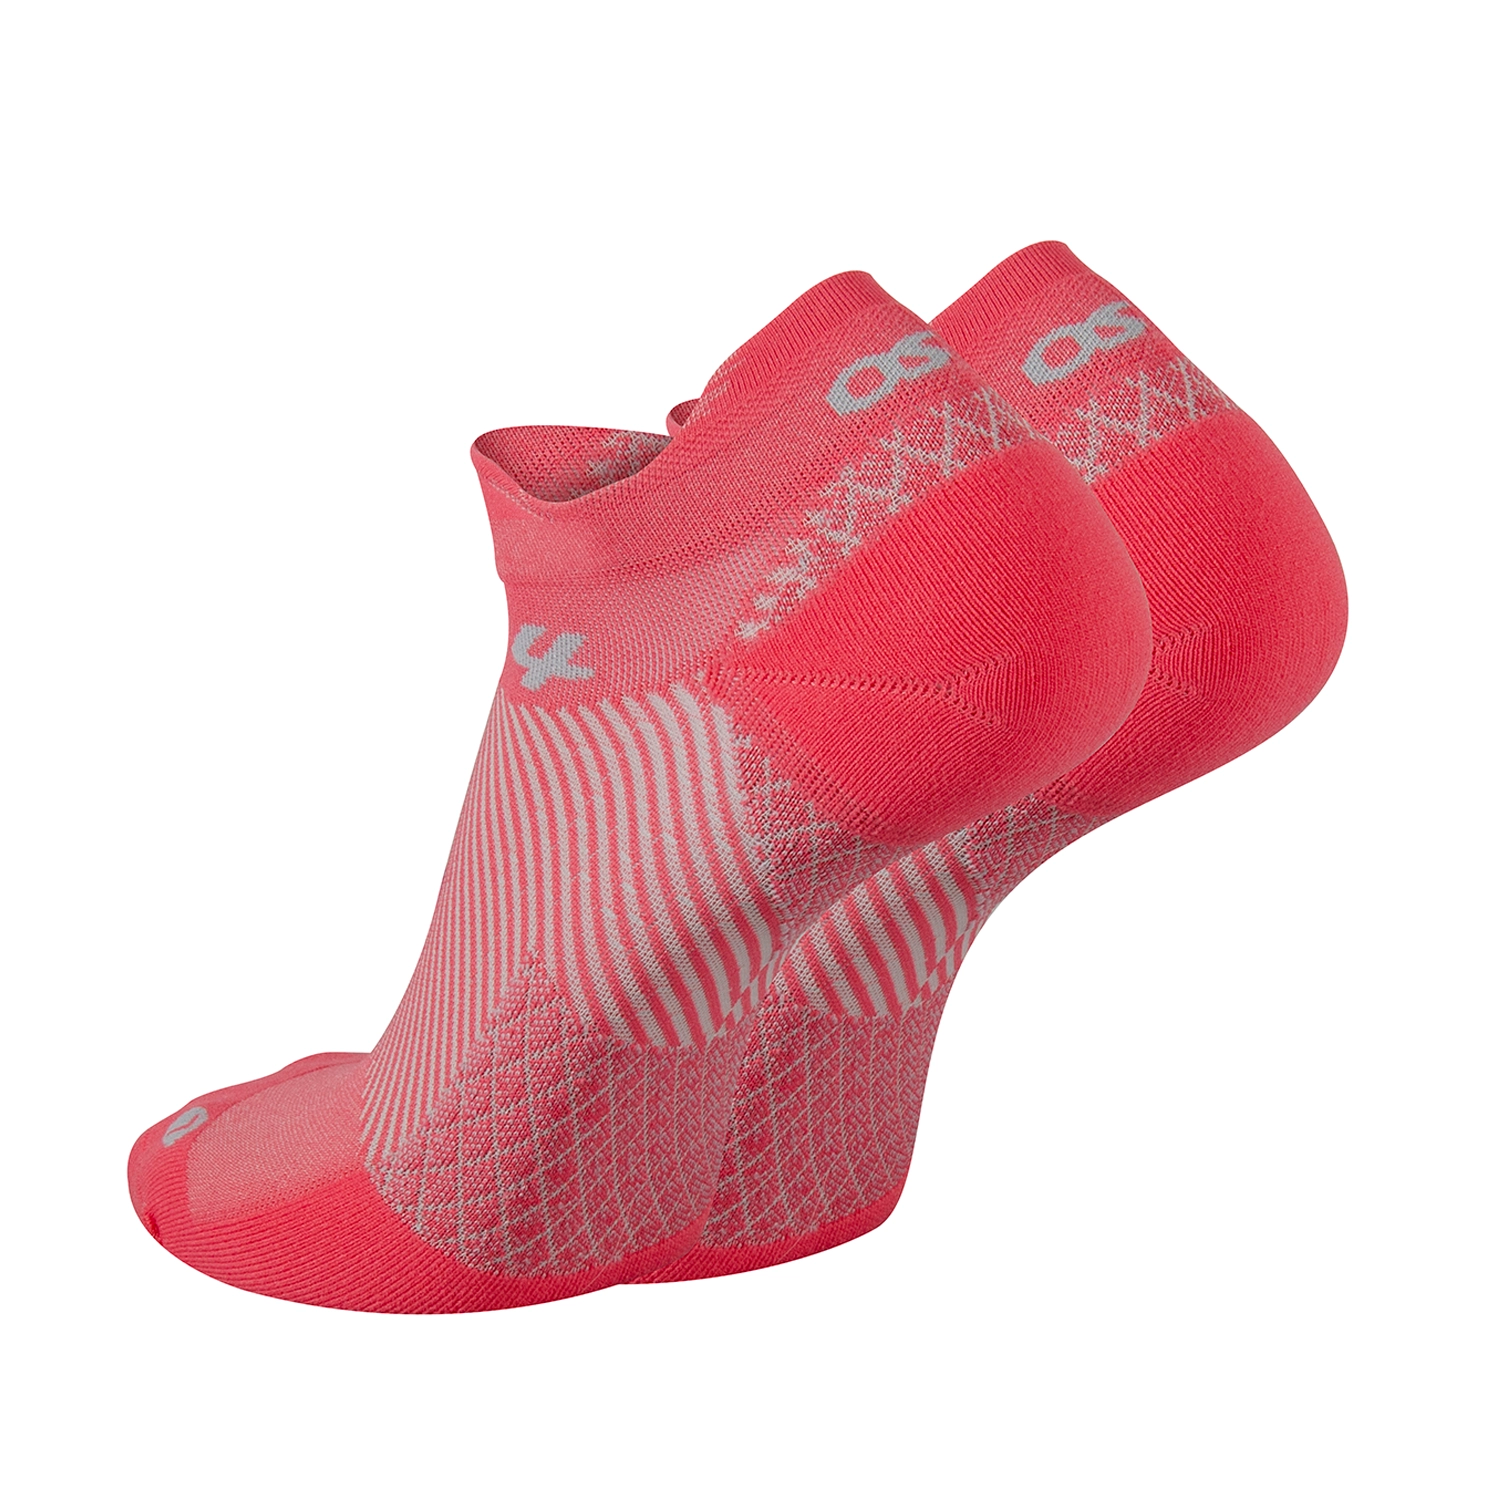 FS4 Plantar Fasciitis Compression no show length socks in coral | OS1st